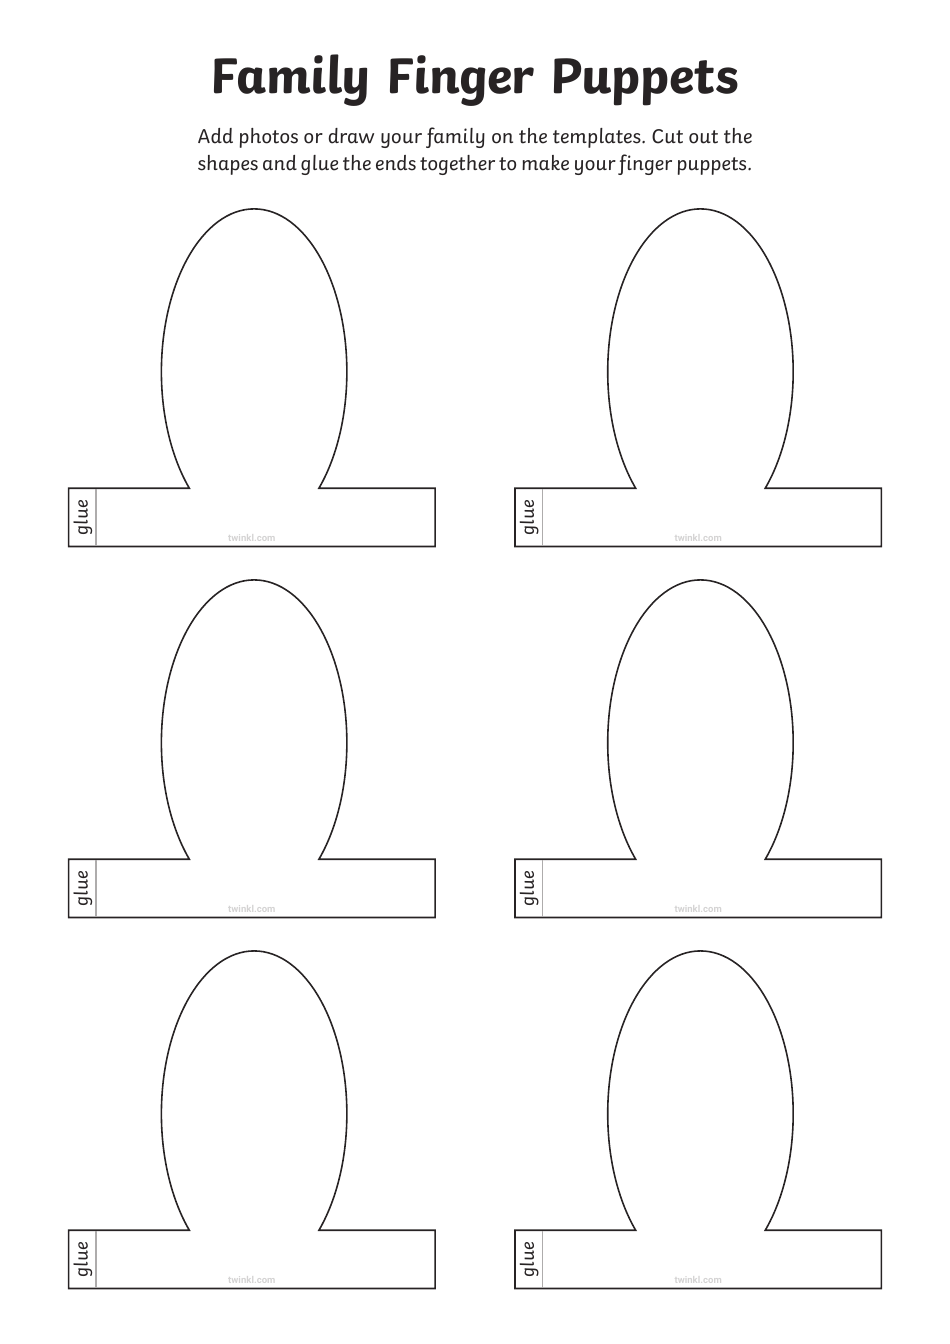 Family Finger Puppet Templates, Page 1